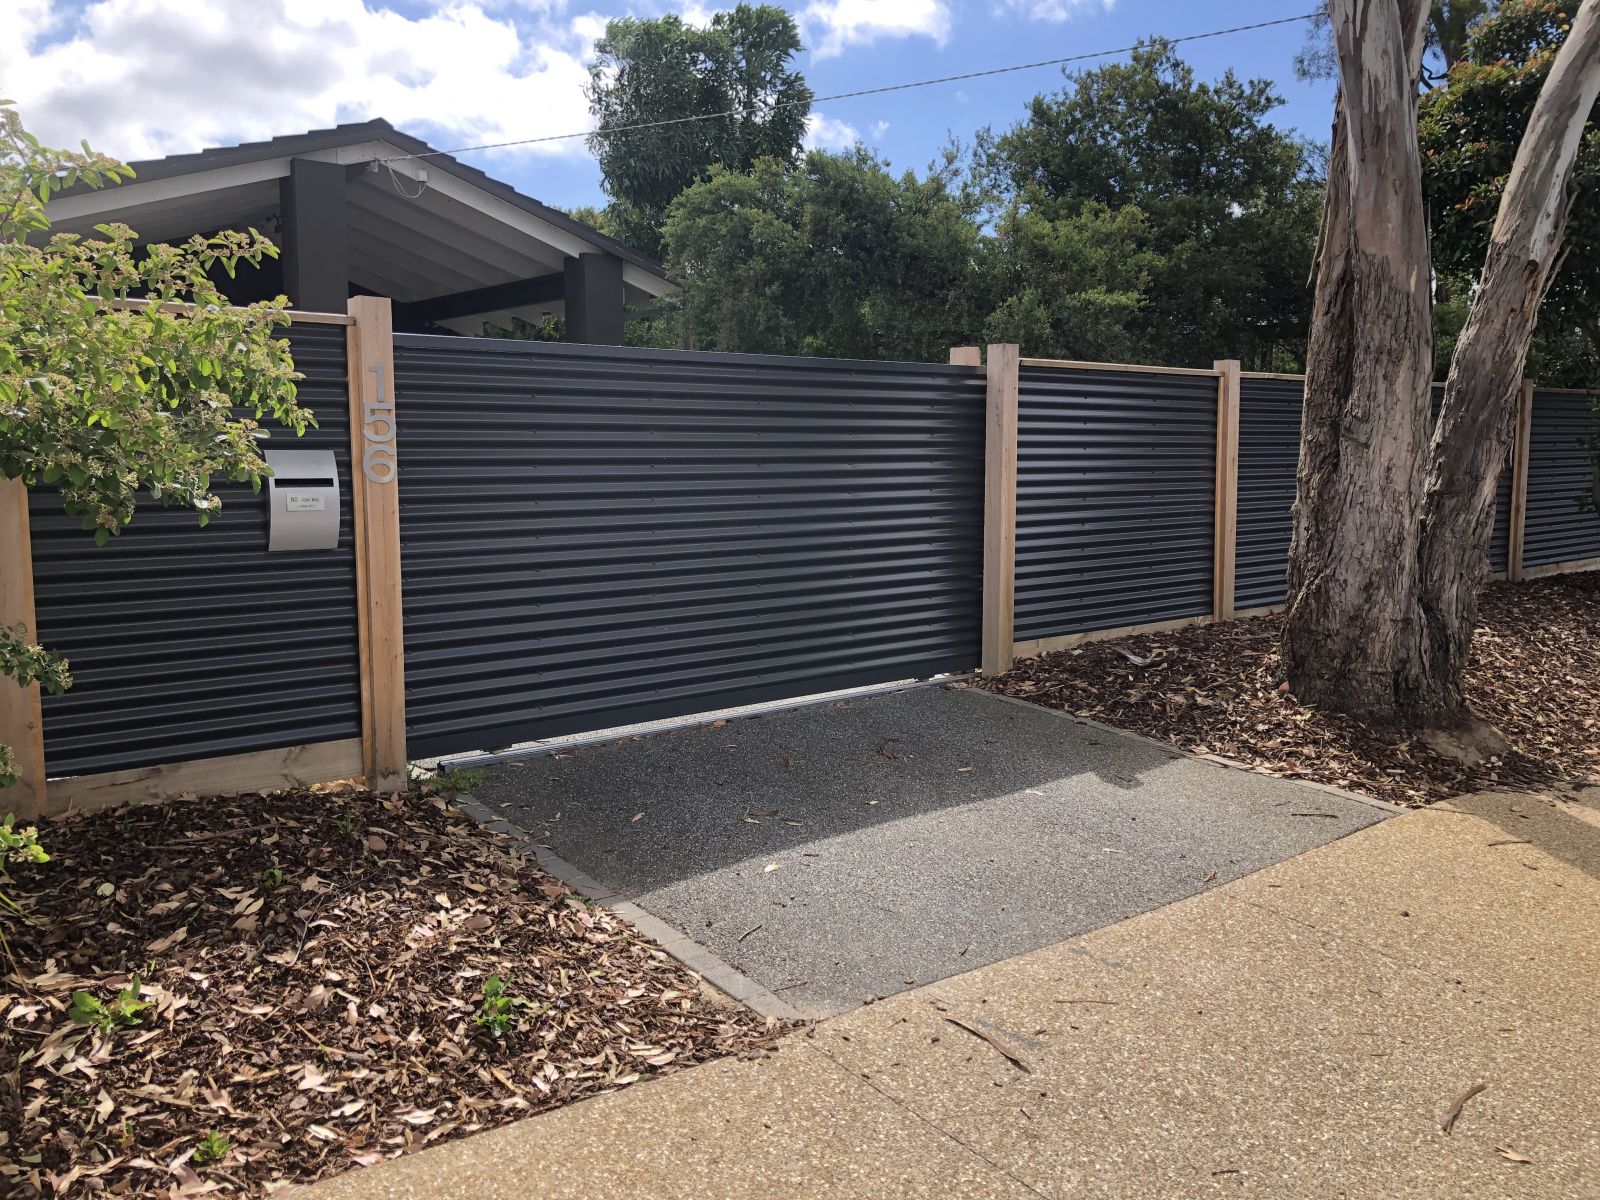 Durable Colorbond fencing in classic grey color, providing privacy and security for your property